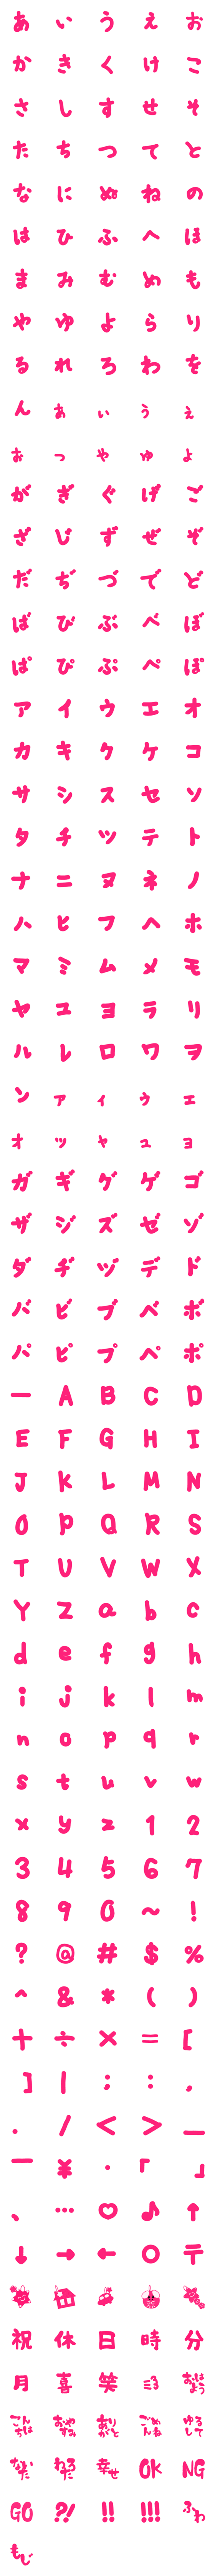 [LINE絵文字]手書きフォント ふわ文字＆絵文字の画像一覧